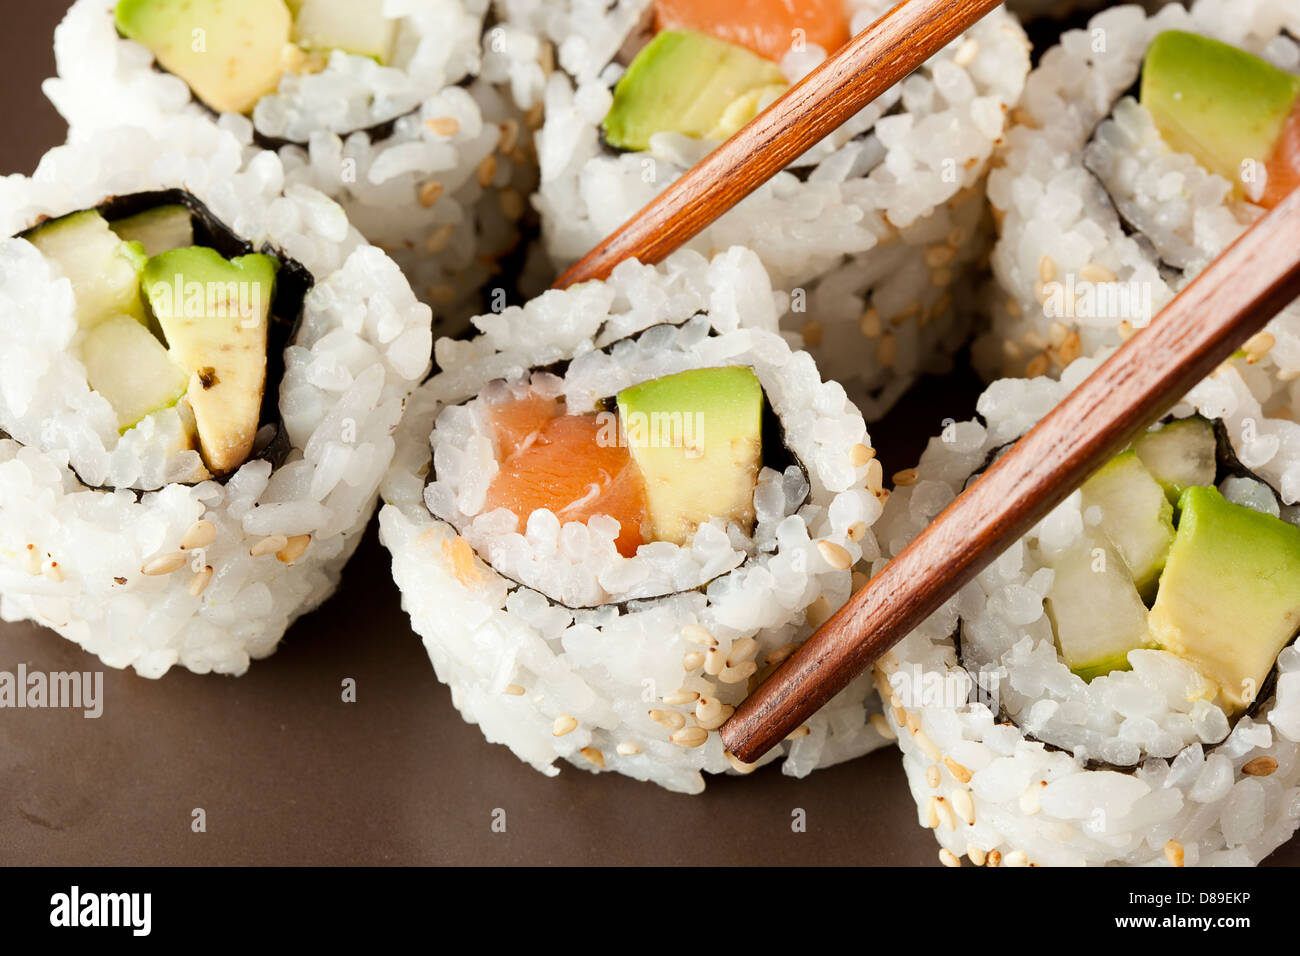 Fresh Homemade Sushi Roll against a background Stock Photo